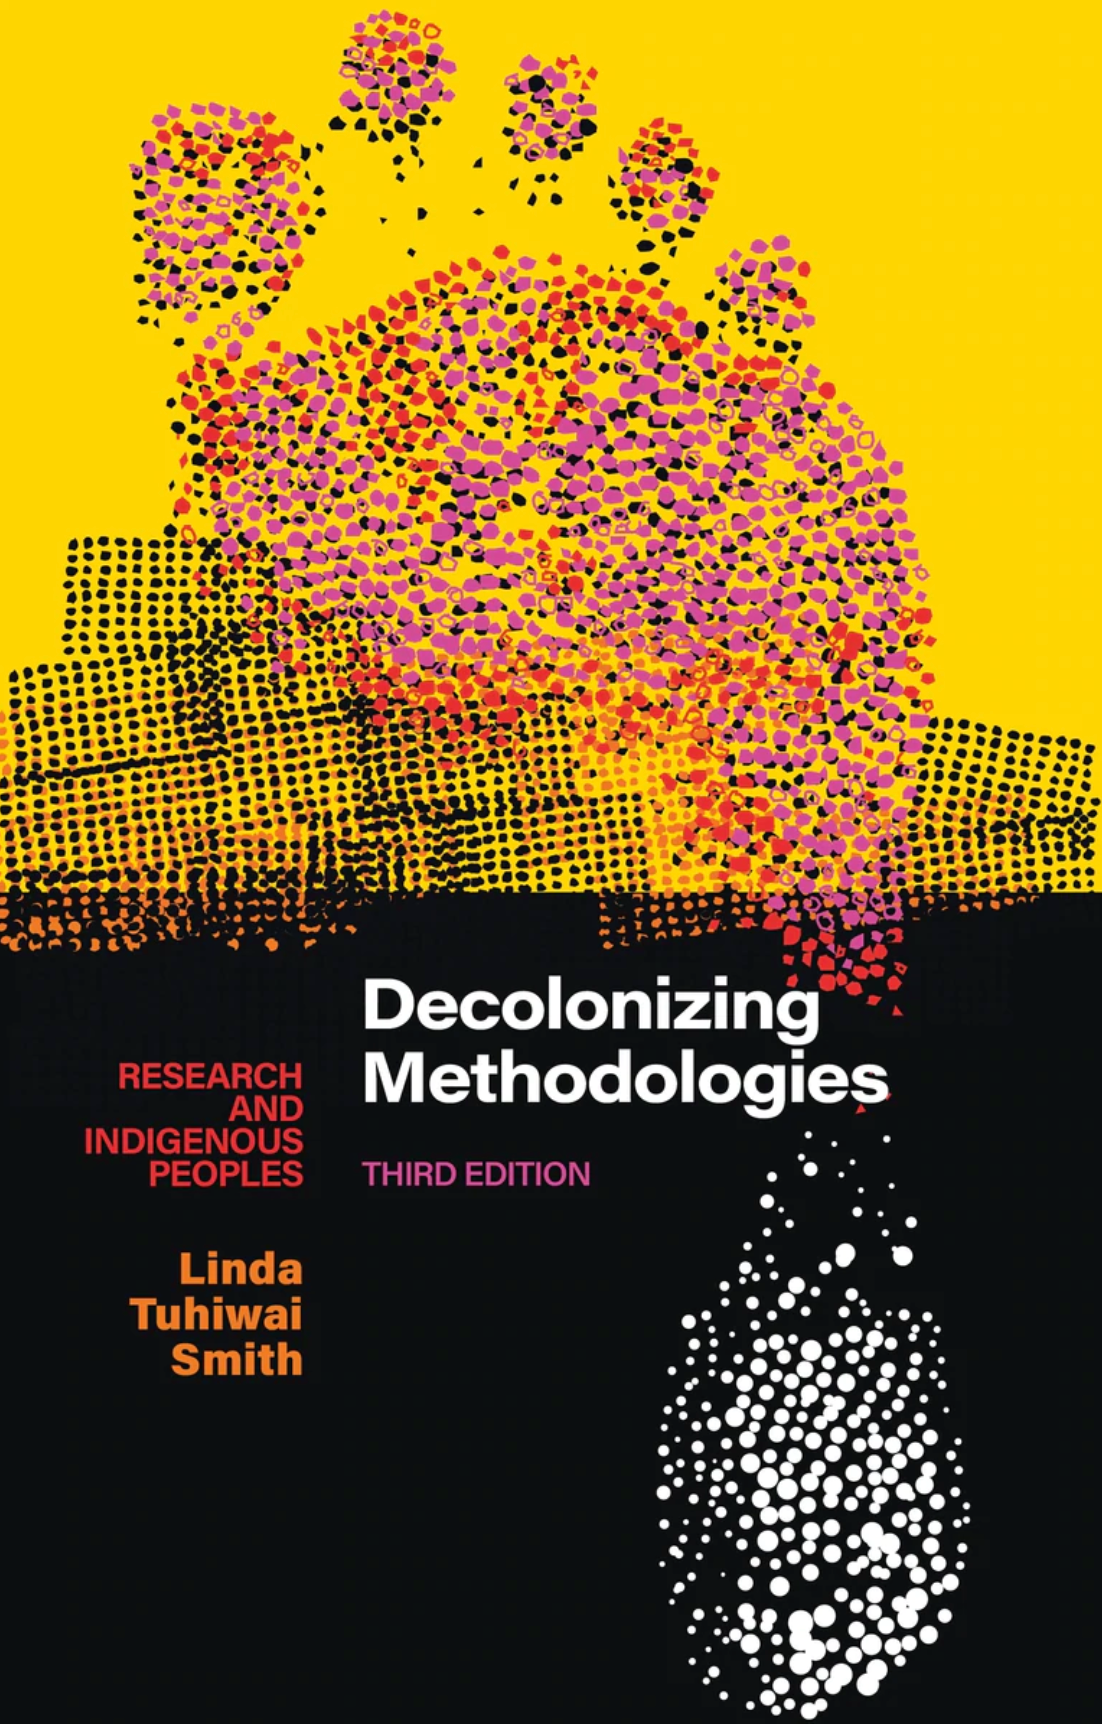 Decolonizing Methodologies // Research and Indigenous Peoples